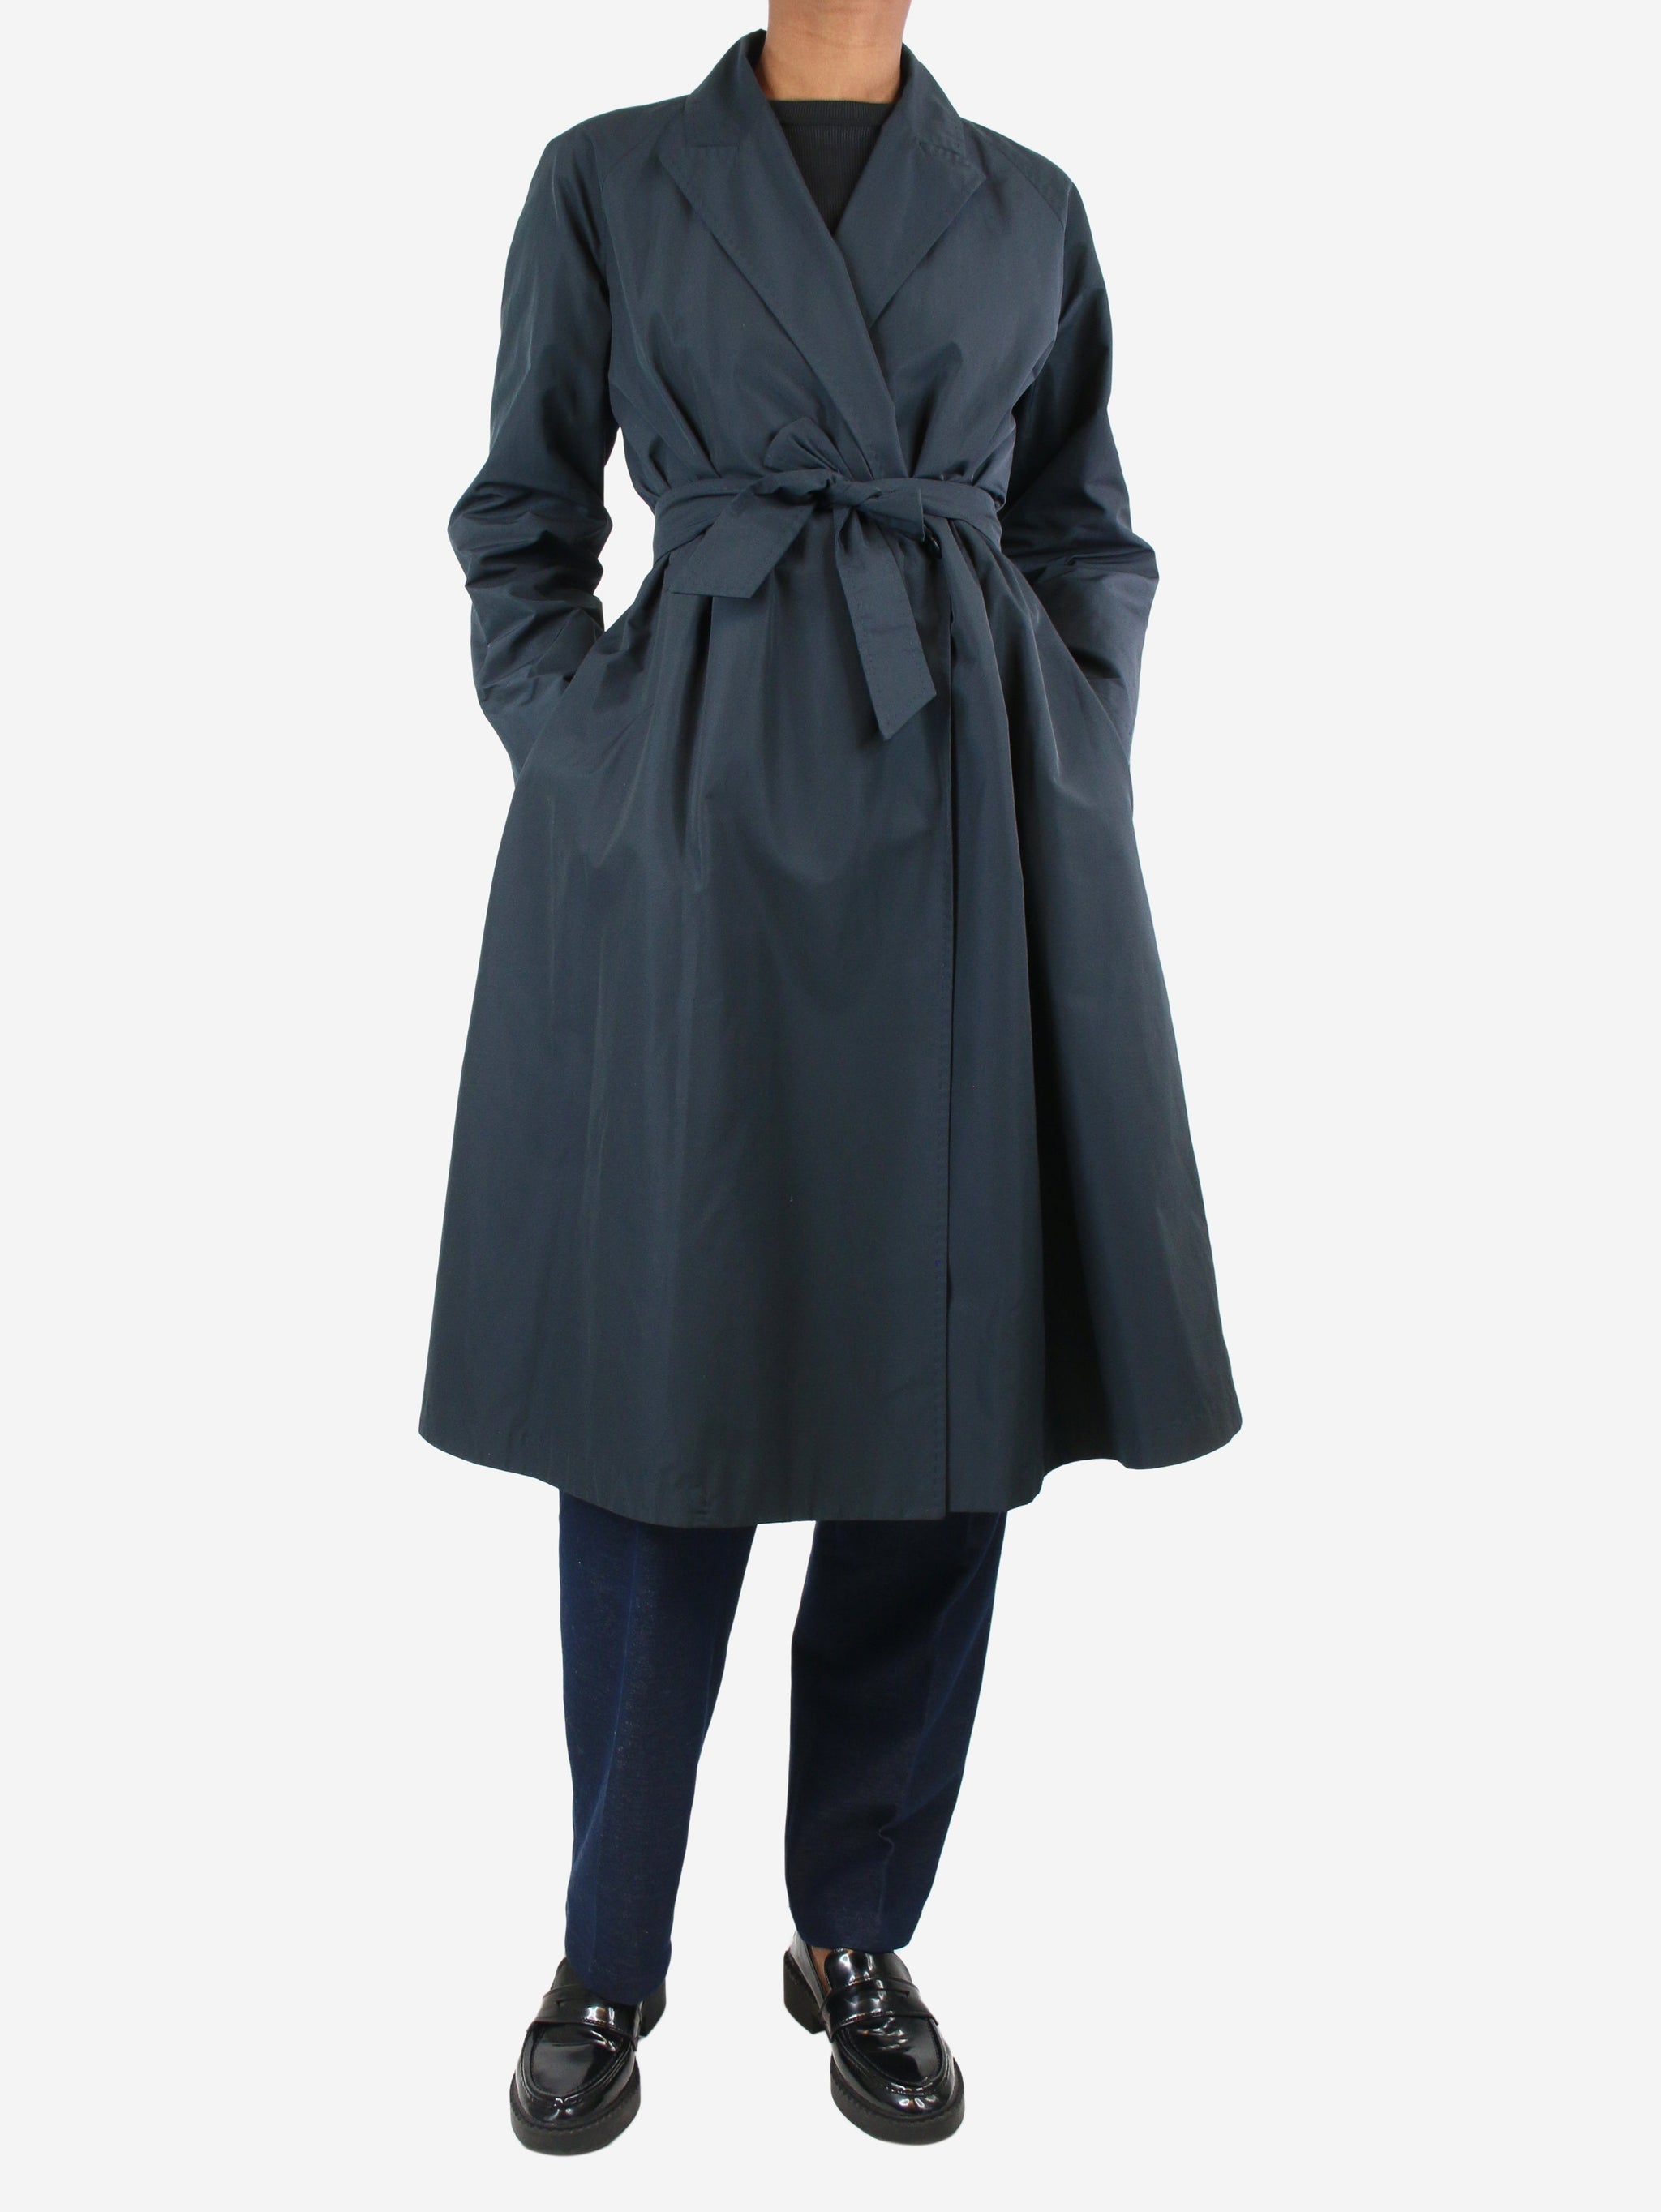 Max Mara pre-owned dark blue belted trench coat | Sign of the Times